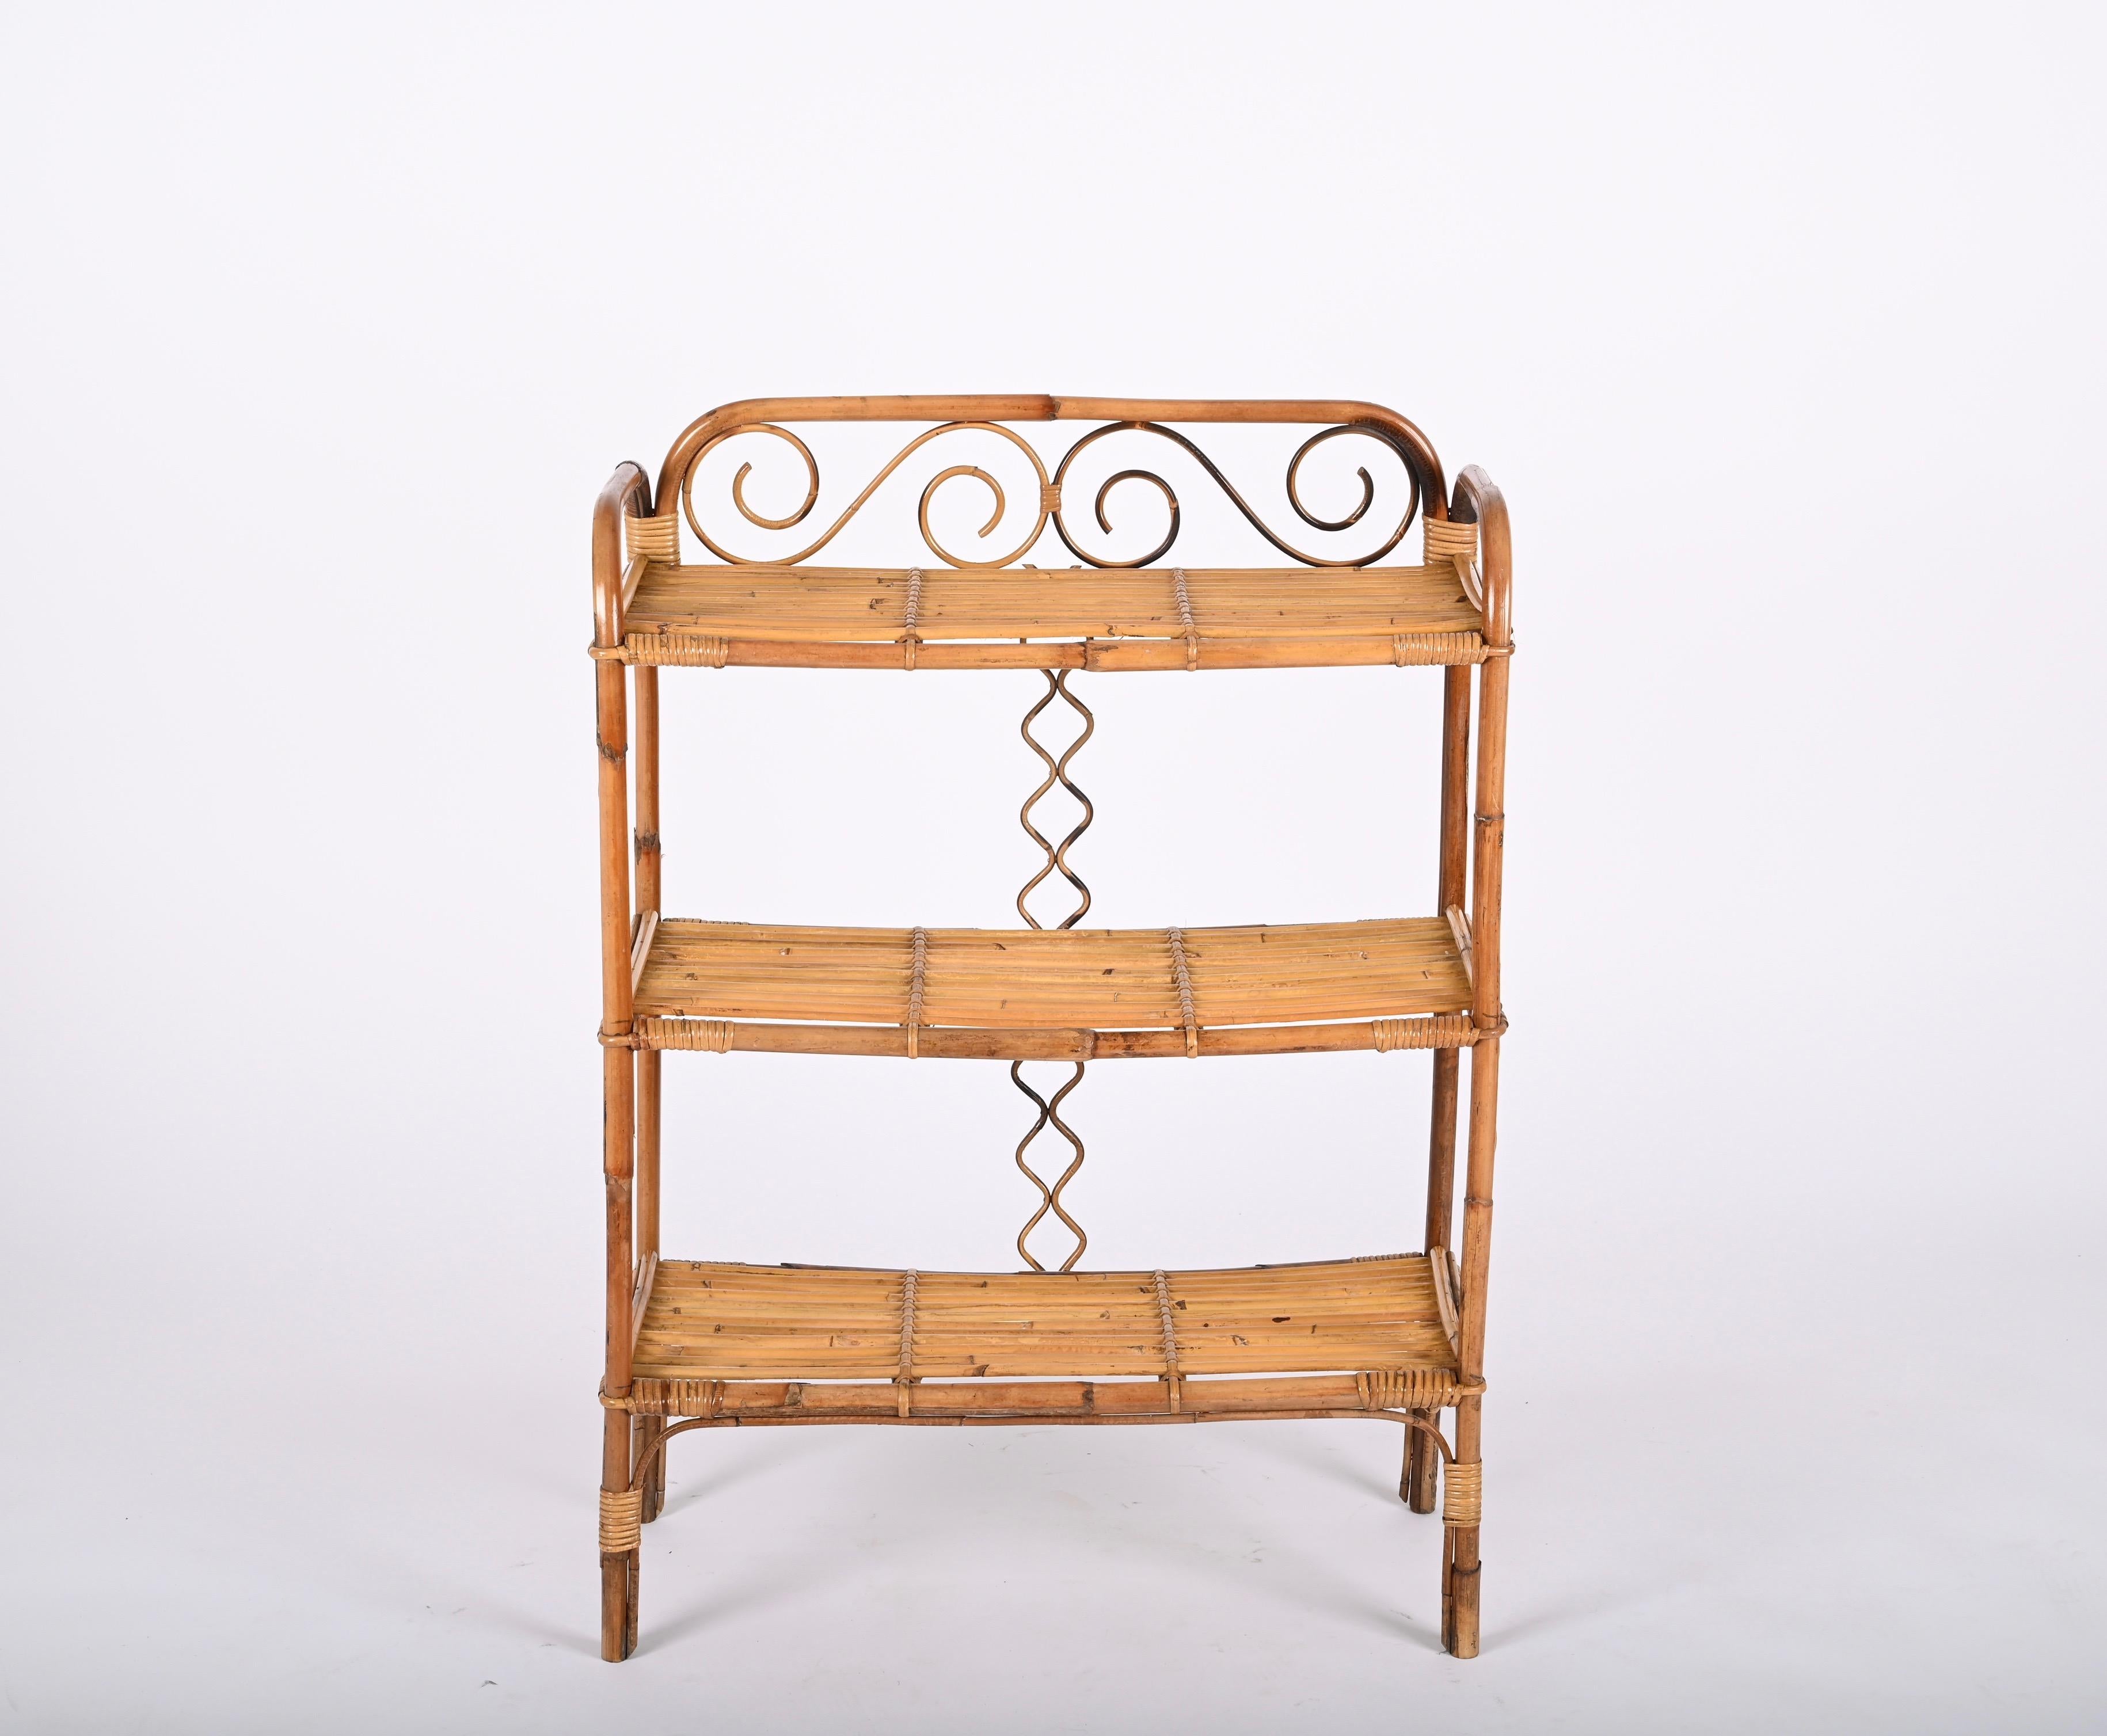 Midcentury Étagère Bamboo and Rattan, Italian Bookcase with Three Shelves, 1970s For Sale 1